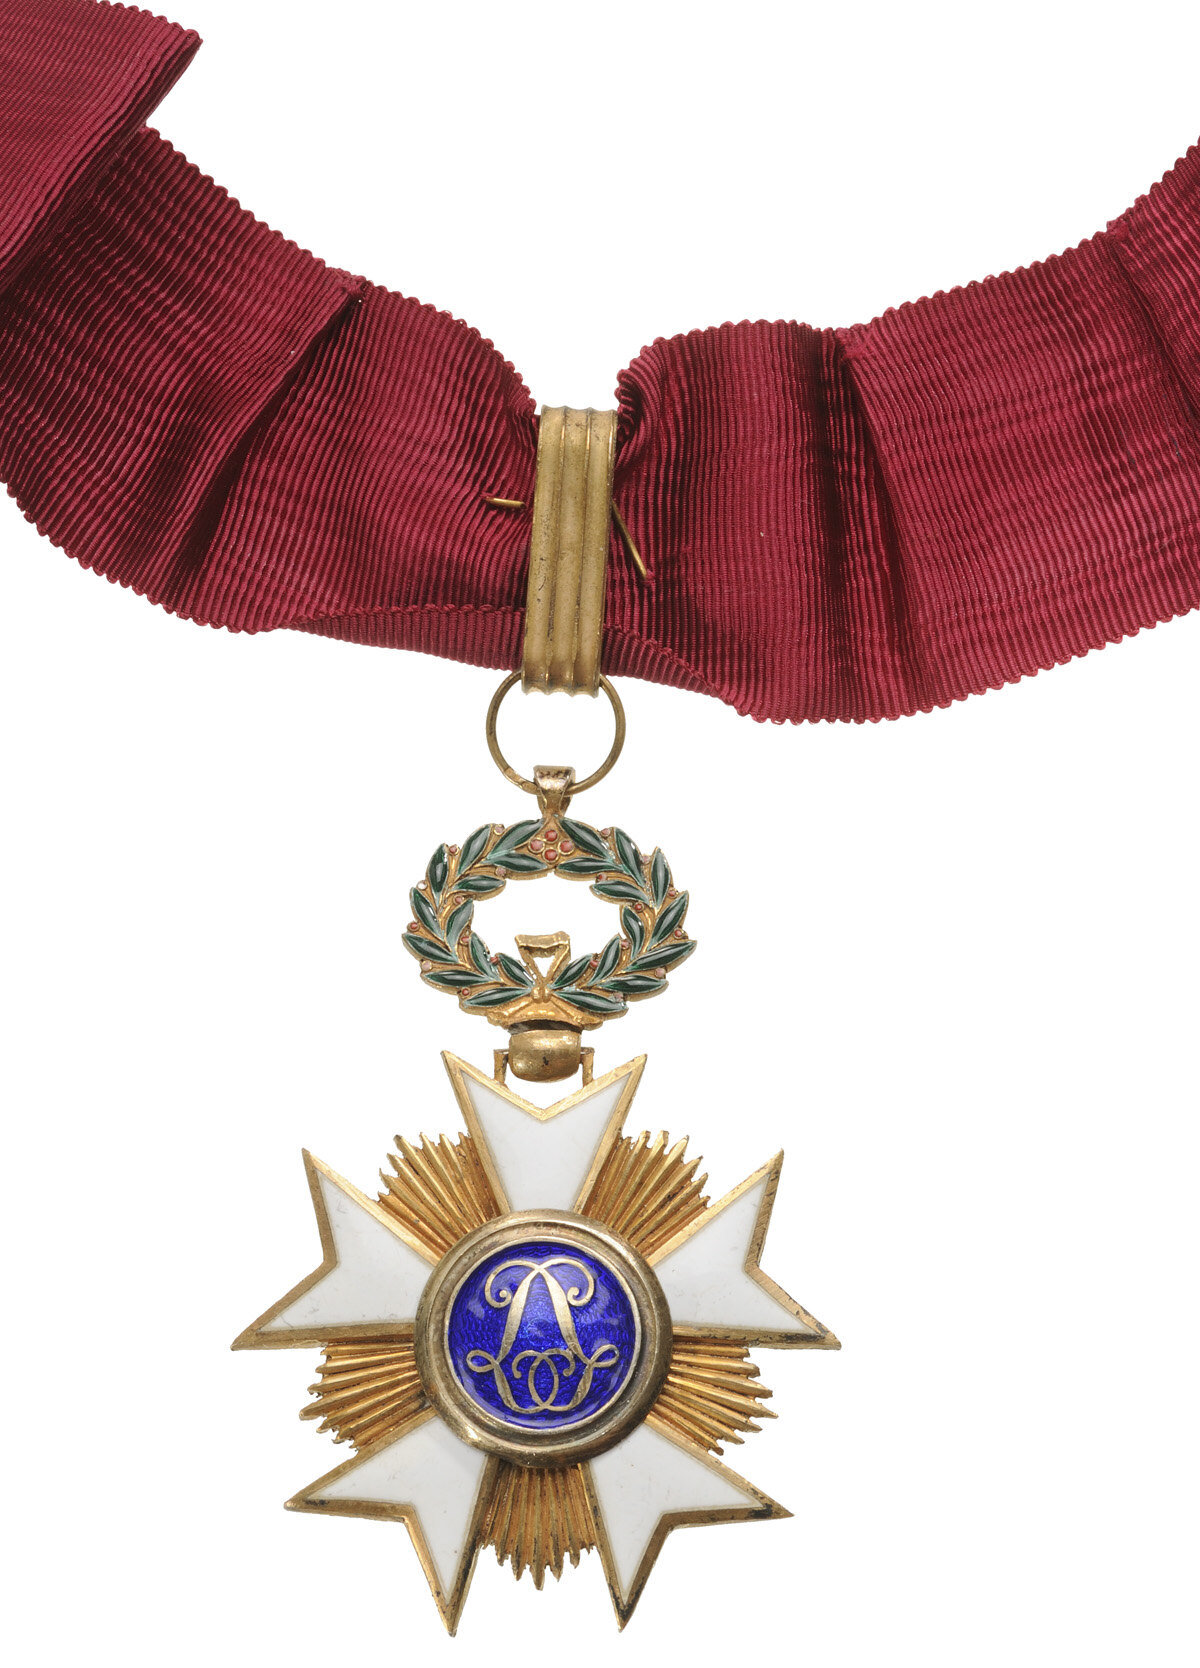 ORDER OF THE CROWN - Image 6 of 6